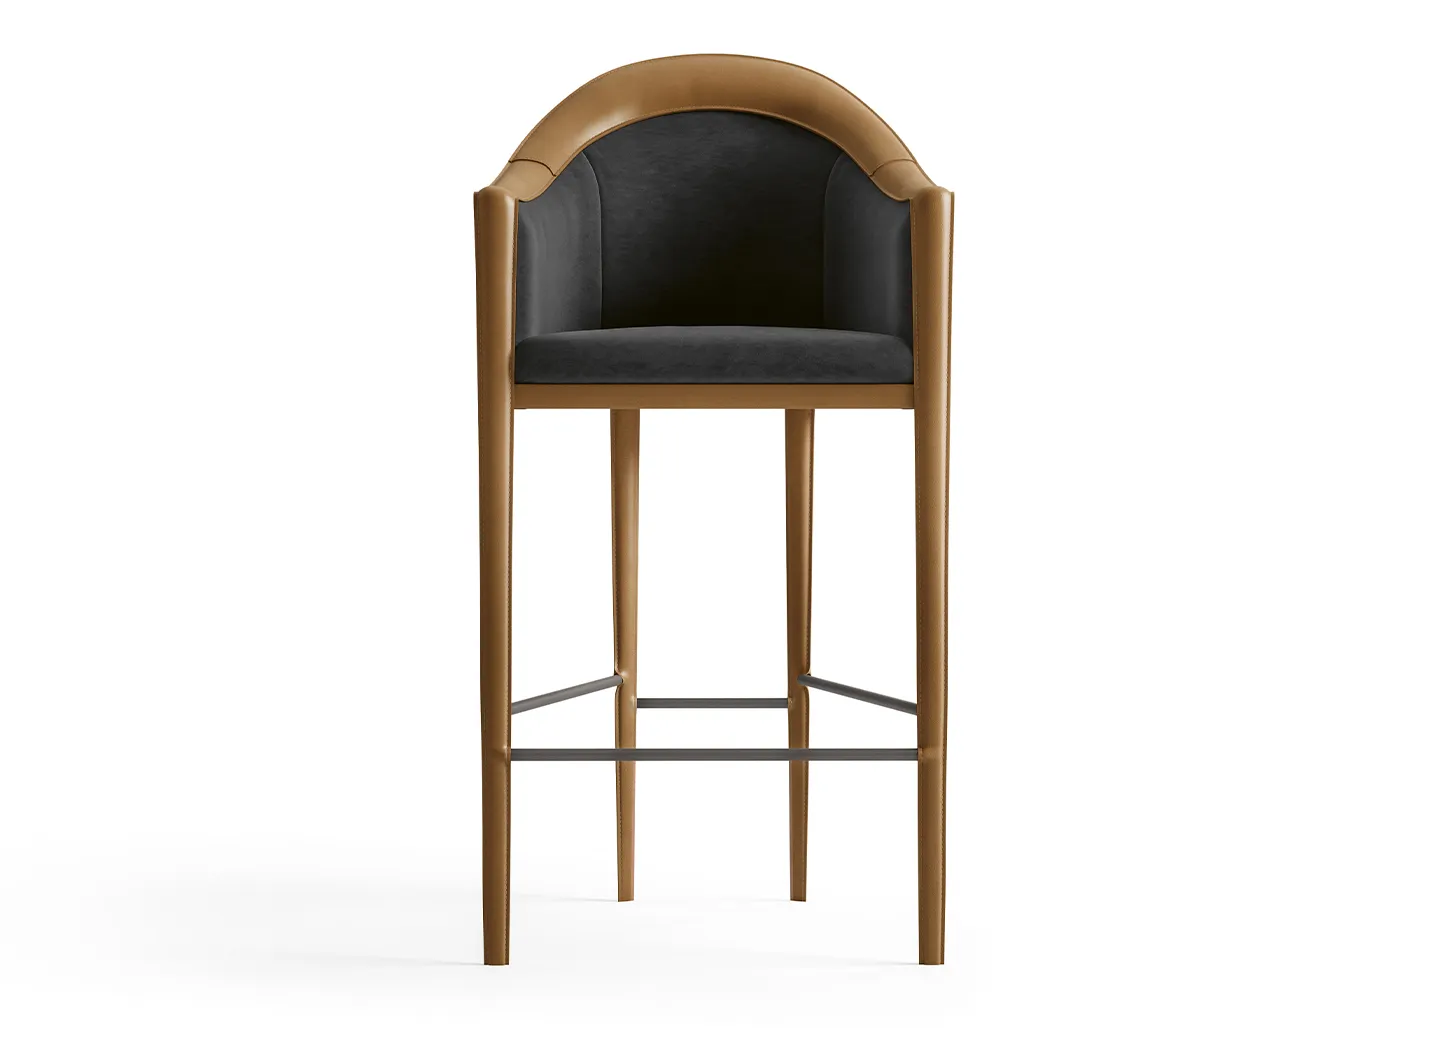 CPRN Homood-Stool with saddle leather